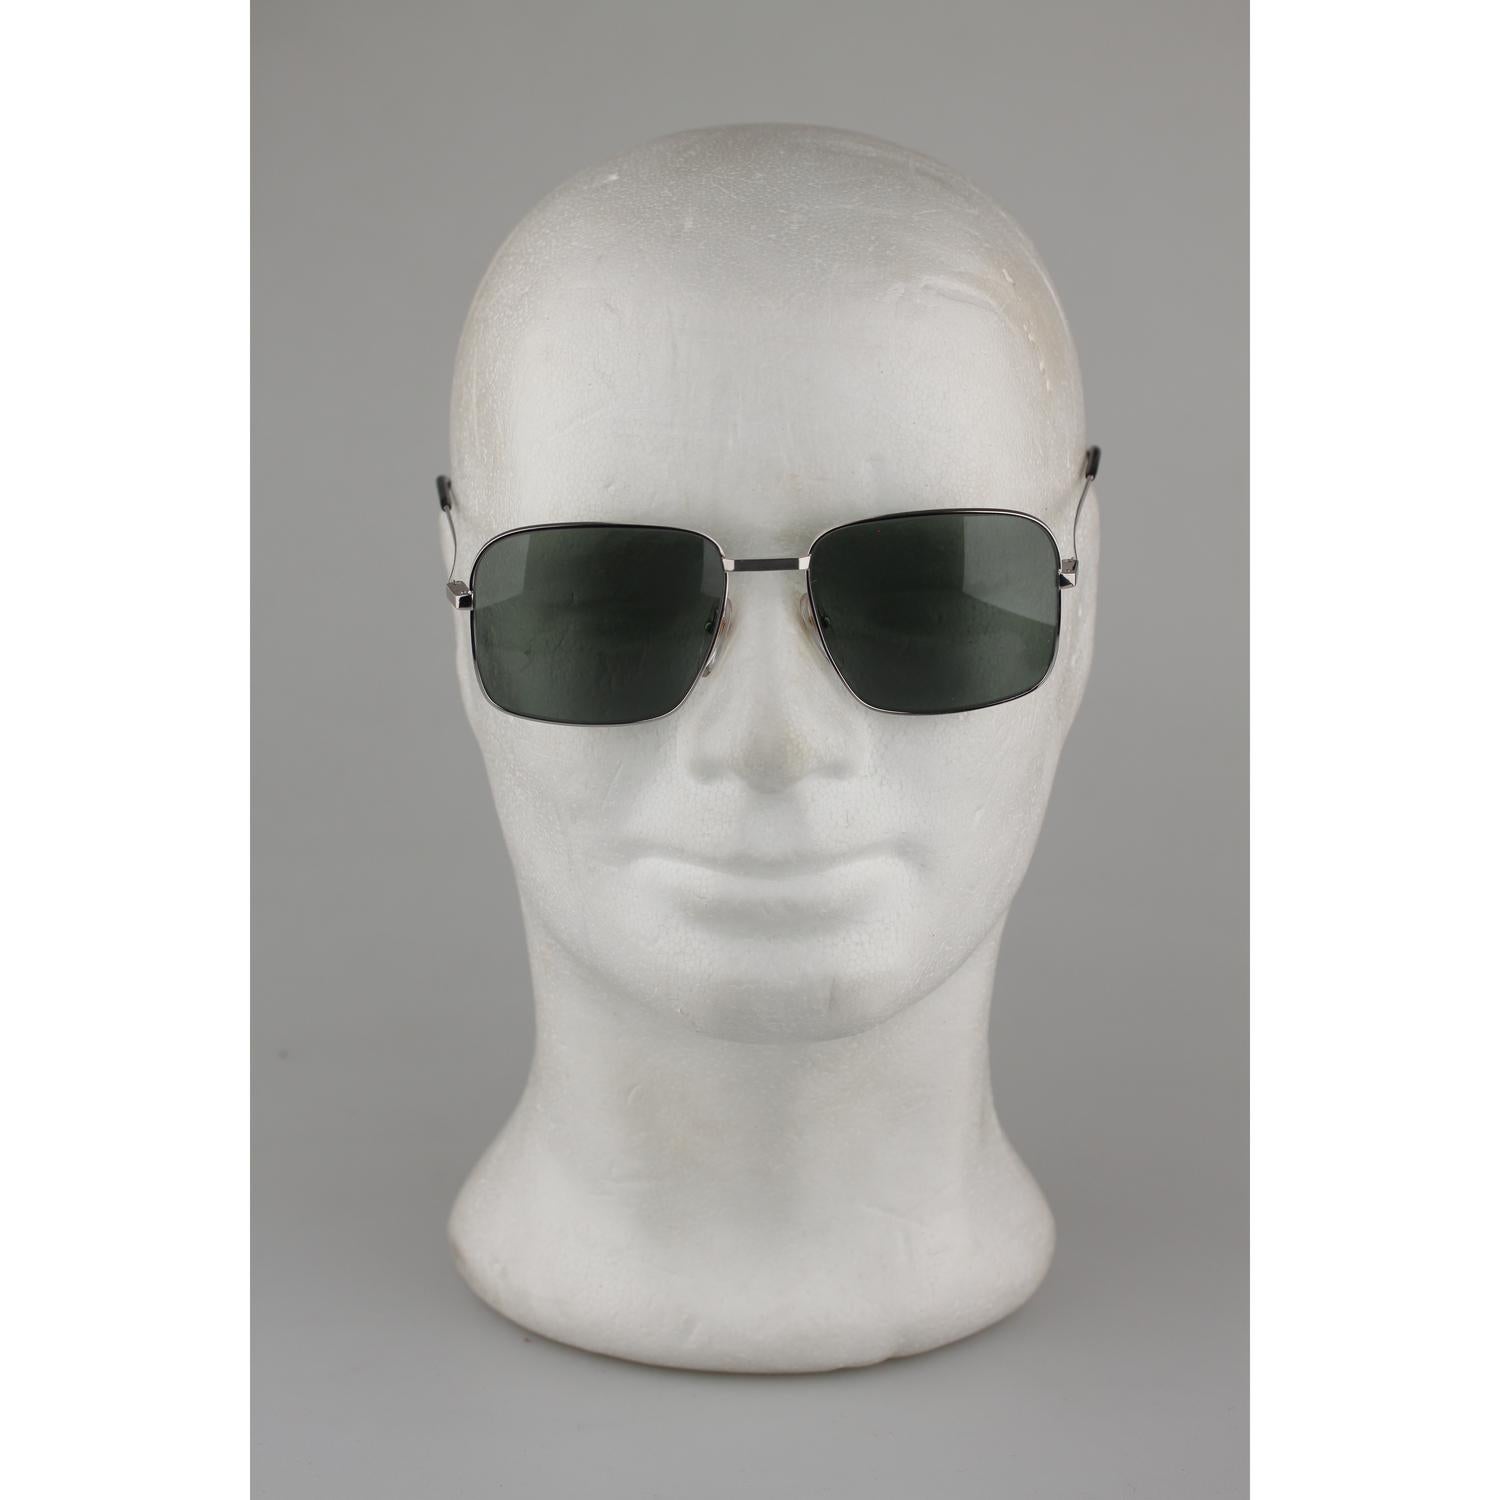 Vogue D'Or by Bausch & Lomb 1/20 10K GF Gold Filled Silver Sunglasses Mod. 517 For Sale 1